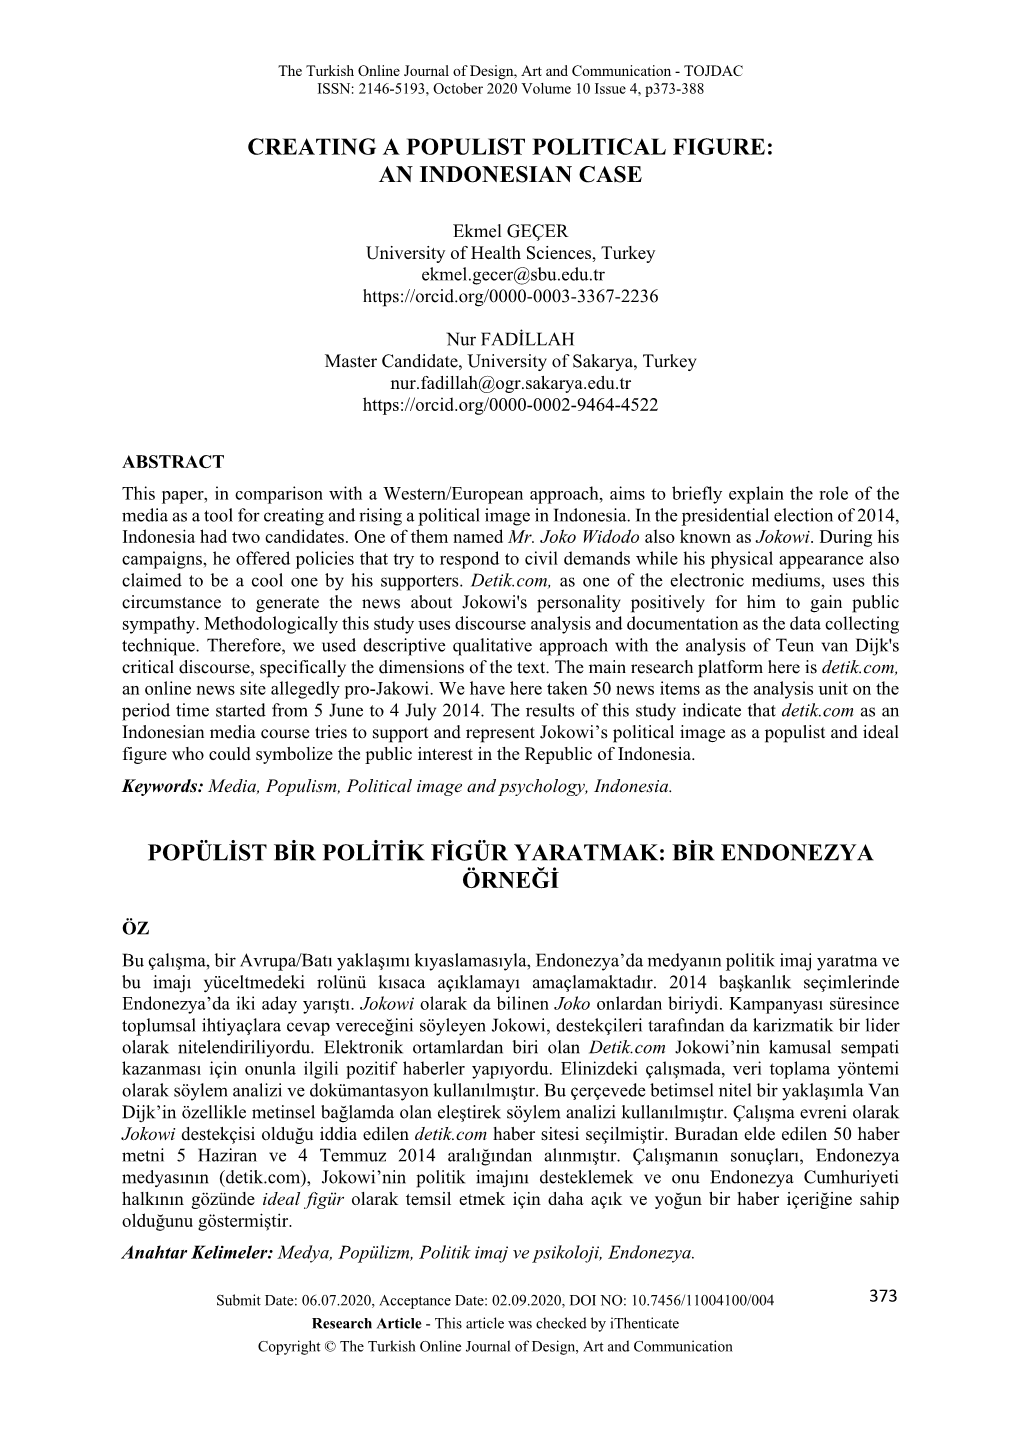 Creating a Populist Political Figure: an Indonesian Case